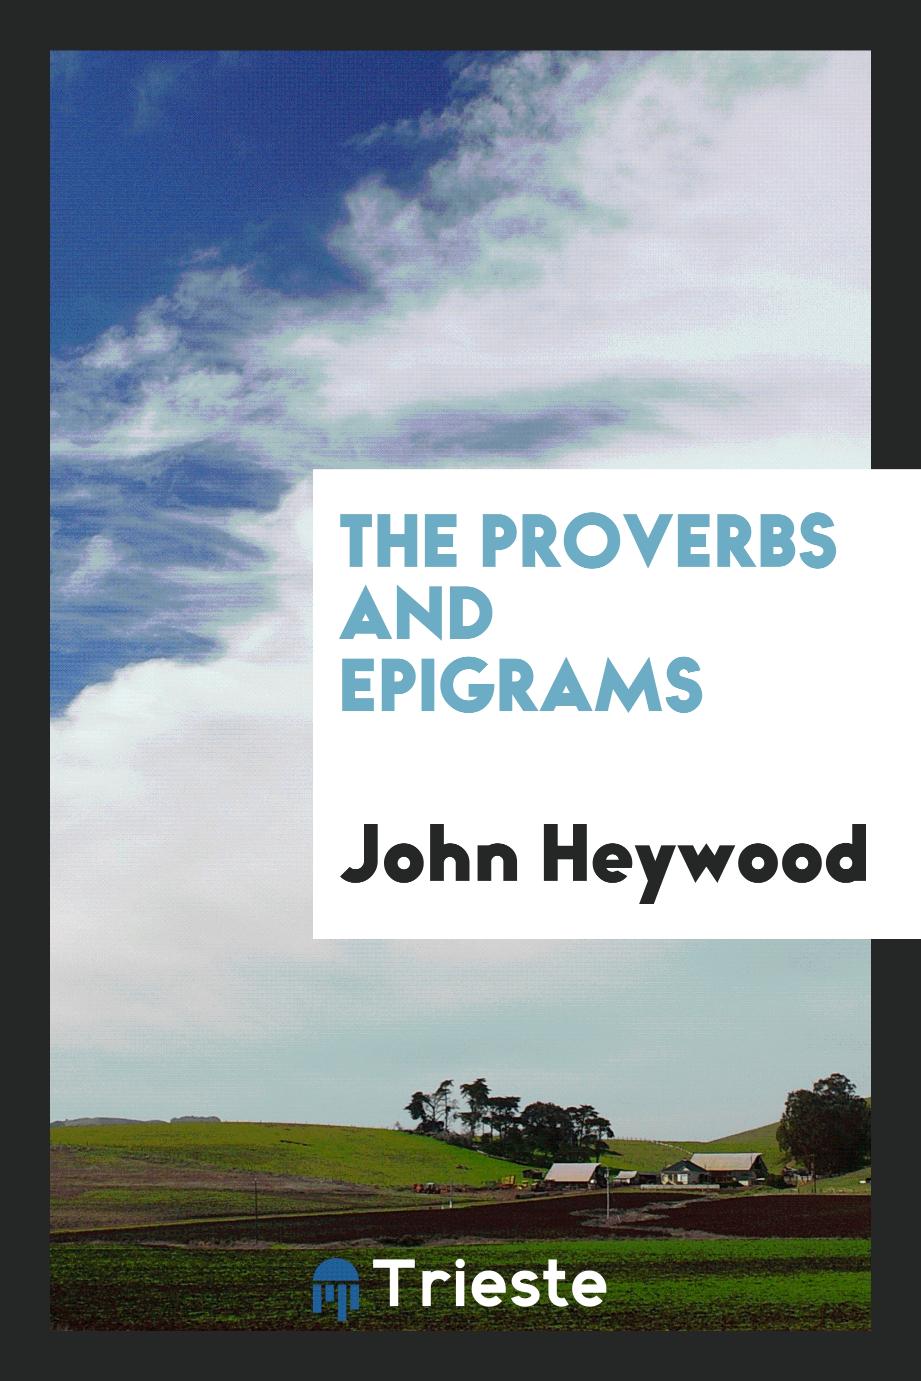 The Proverbs and Epigrams